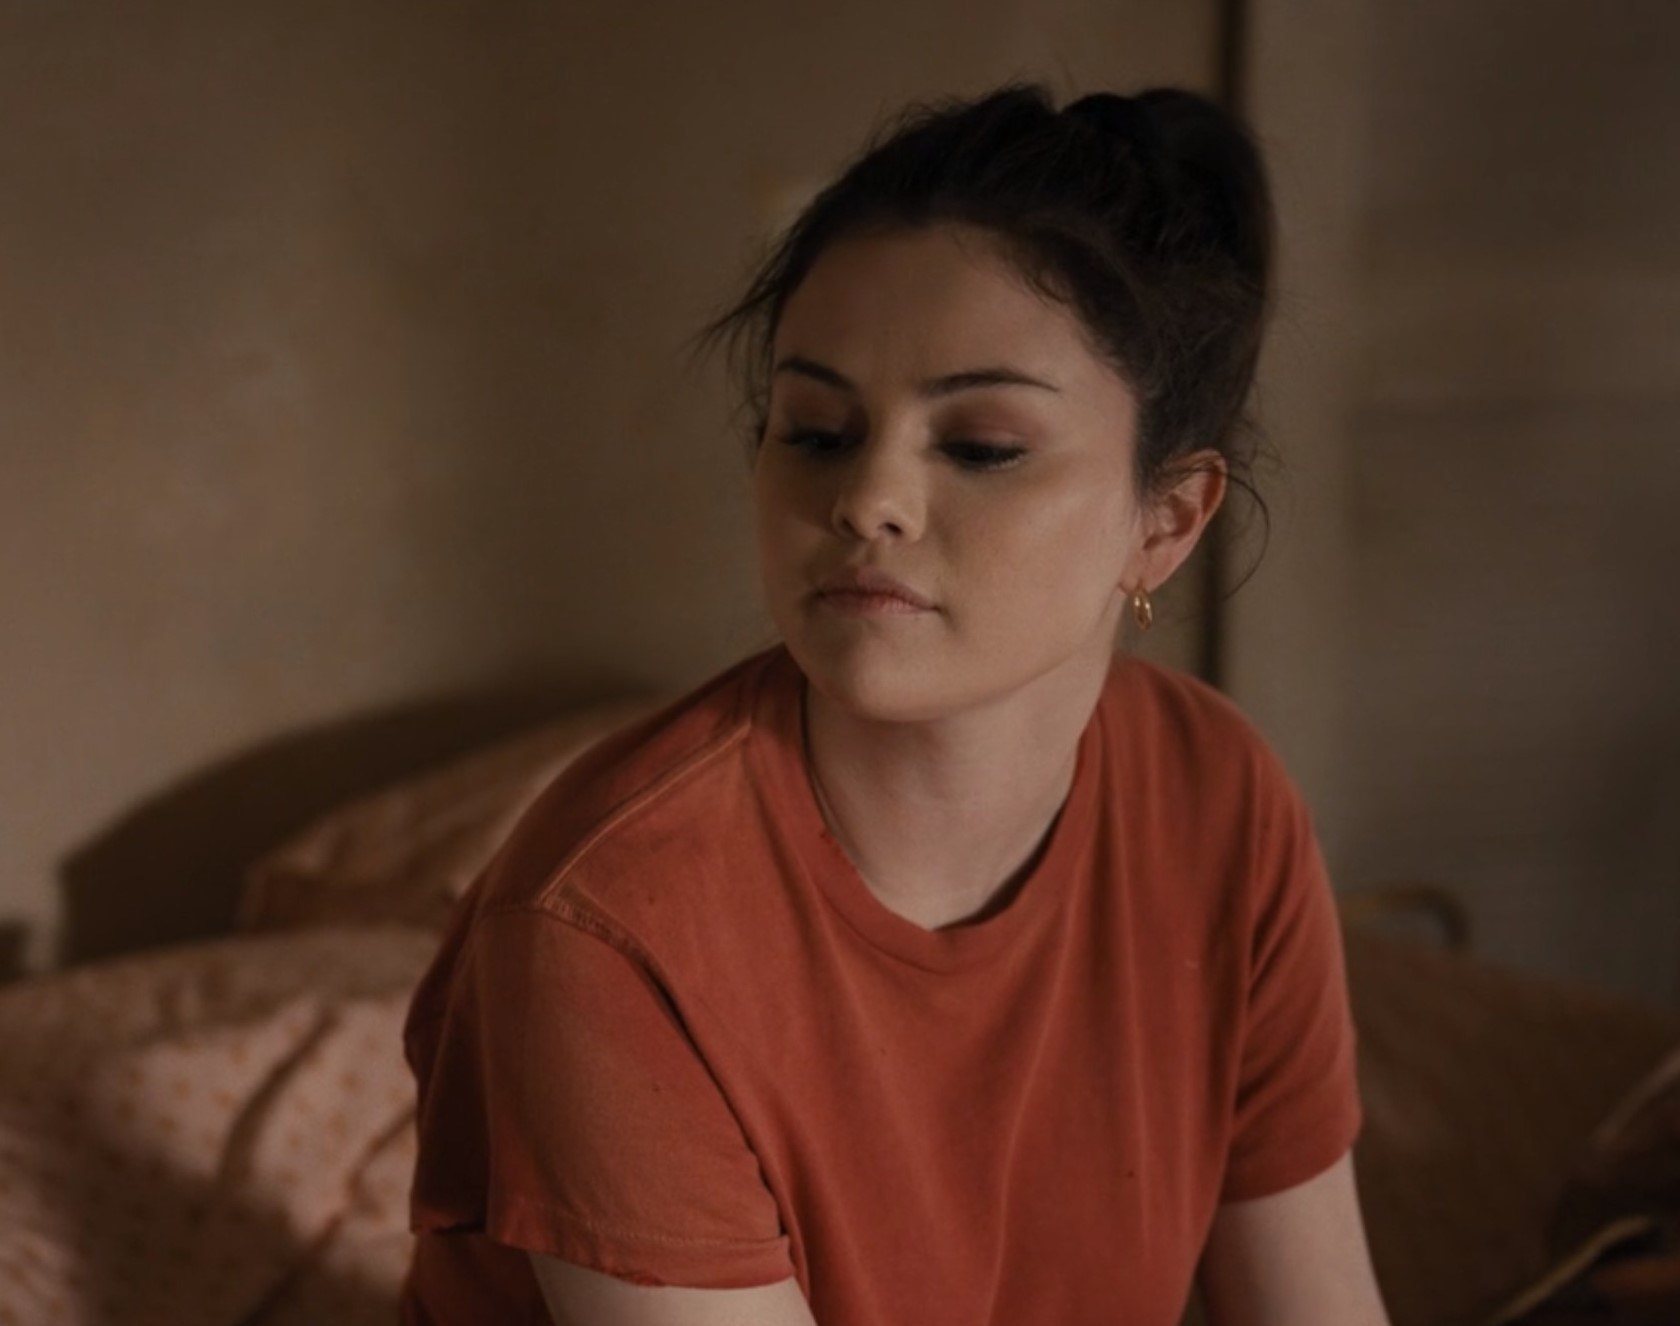 Photo of Selena Gomez as Mabel in a red shirt, gold accessories, and a dusty pink eyeshadow